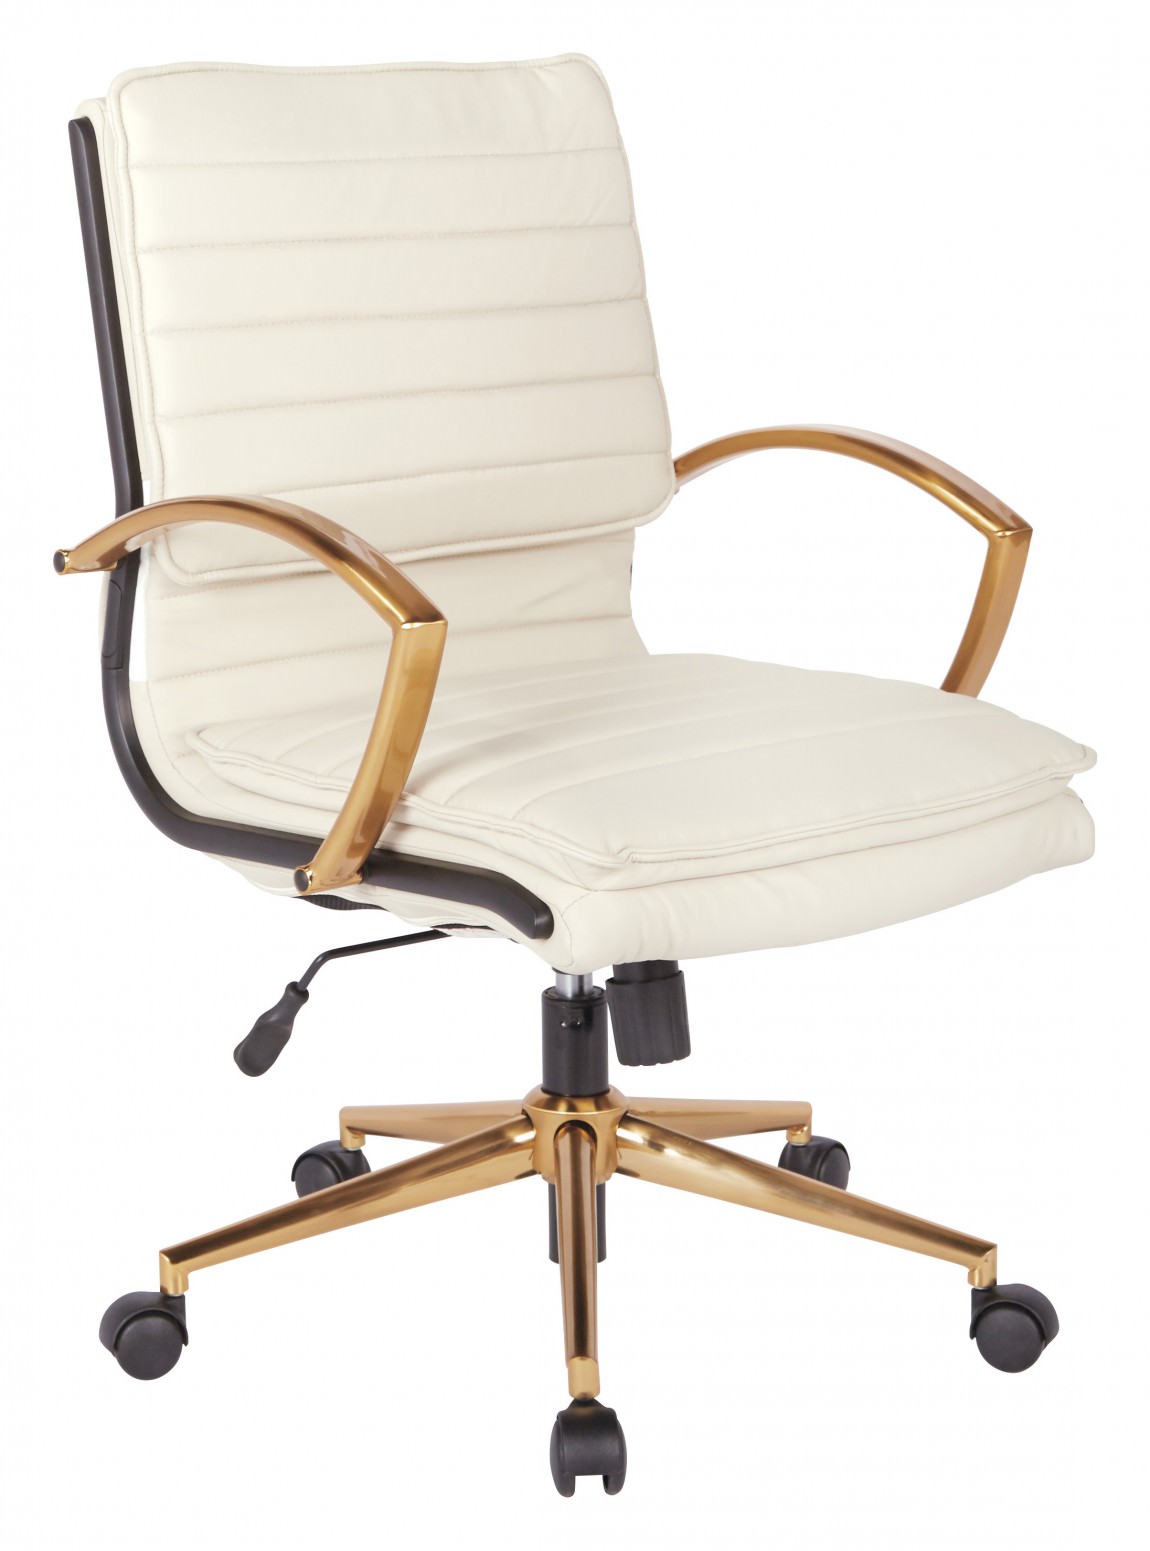 Executive Conference Chair